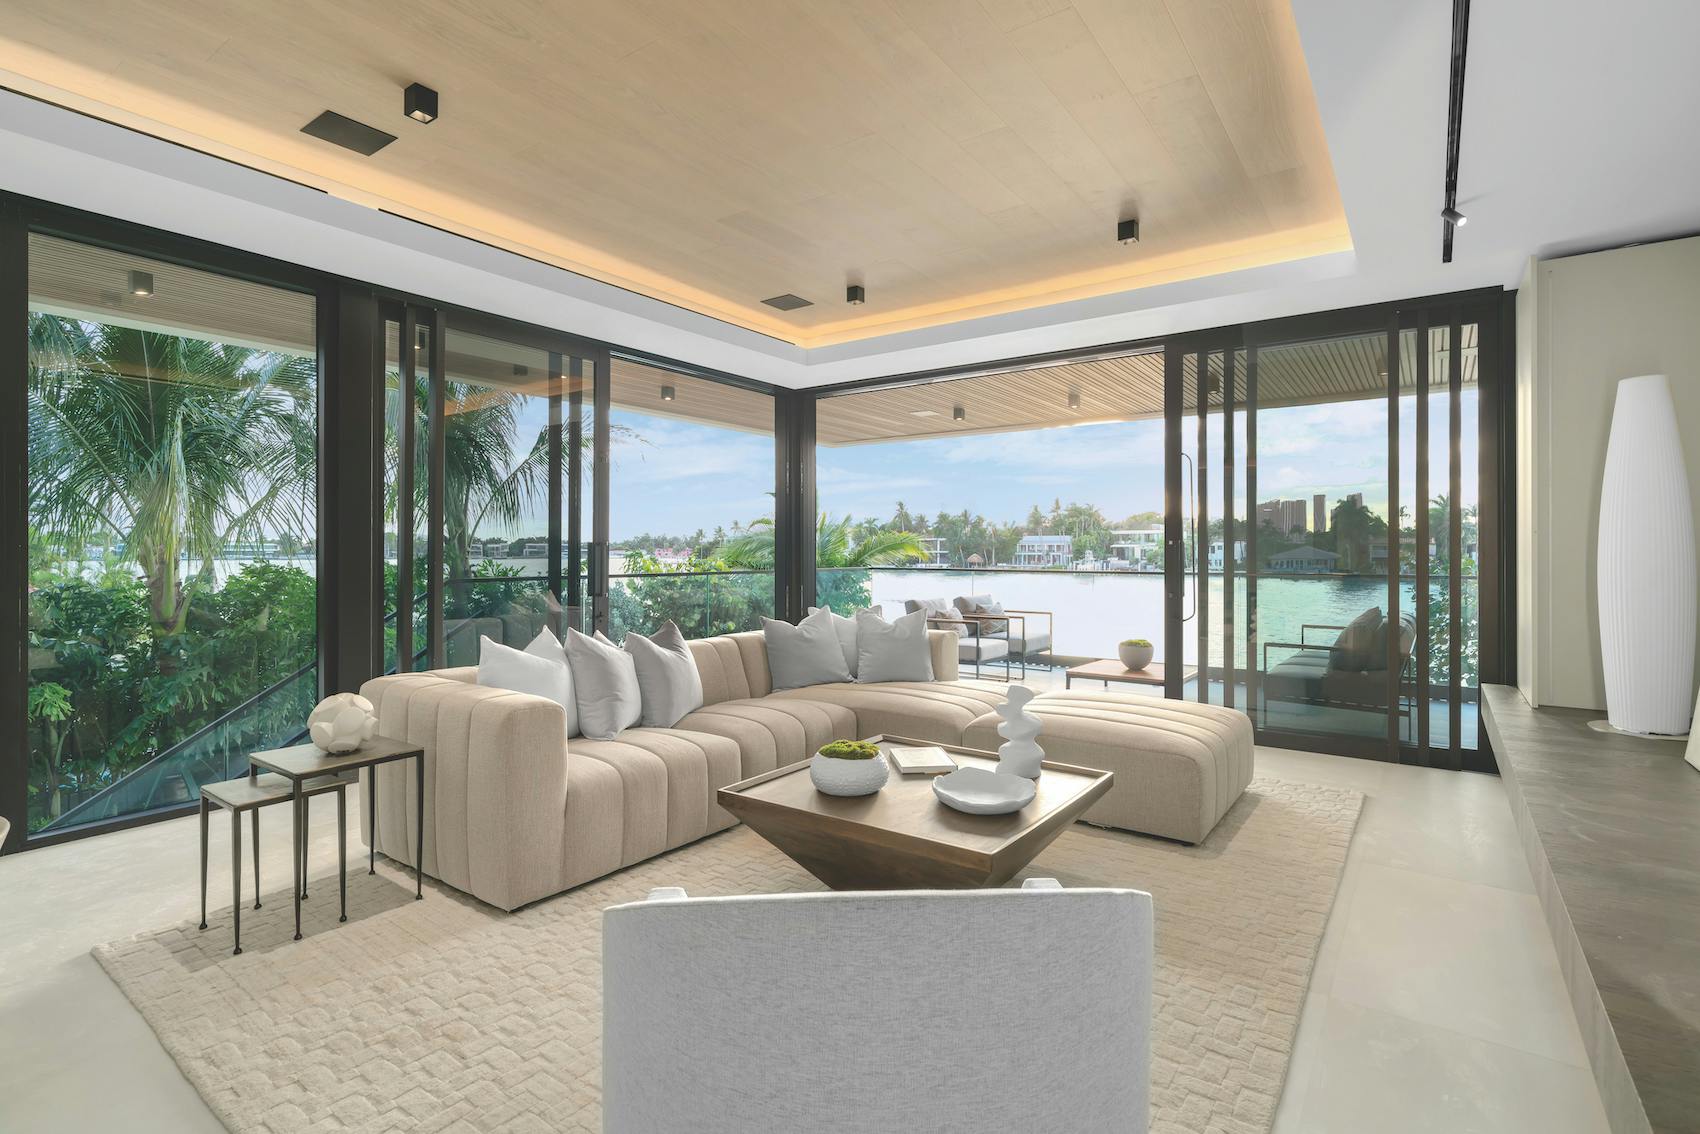 Meridith-Baer-Home-Home-Staging-Florida-Venetian-Island-Modern-Luxury-Homes-Modern-and-Contemporary-Living-Room